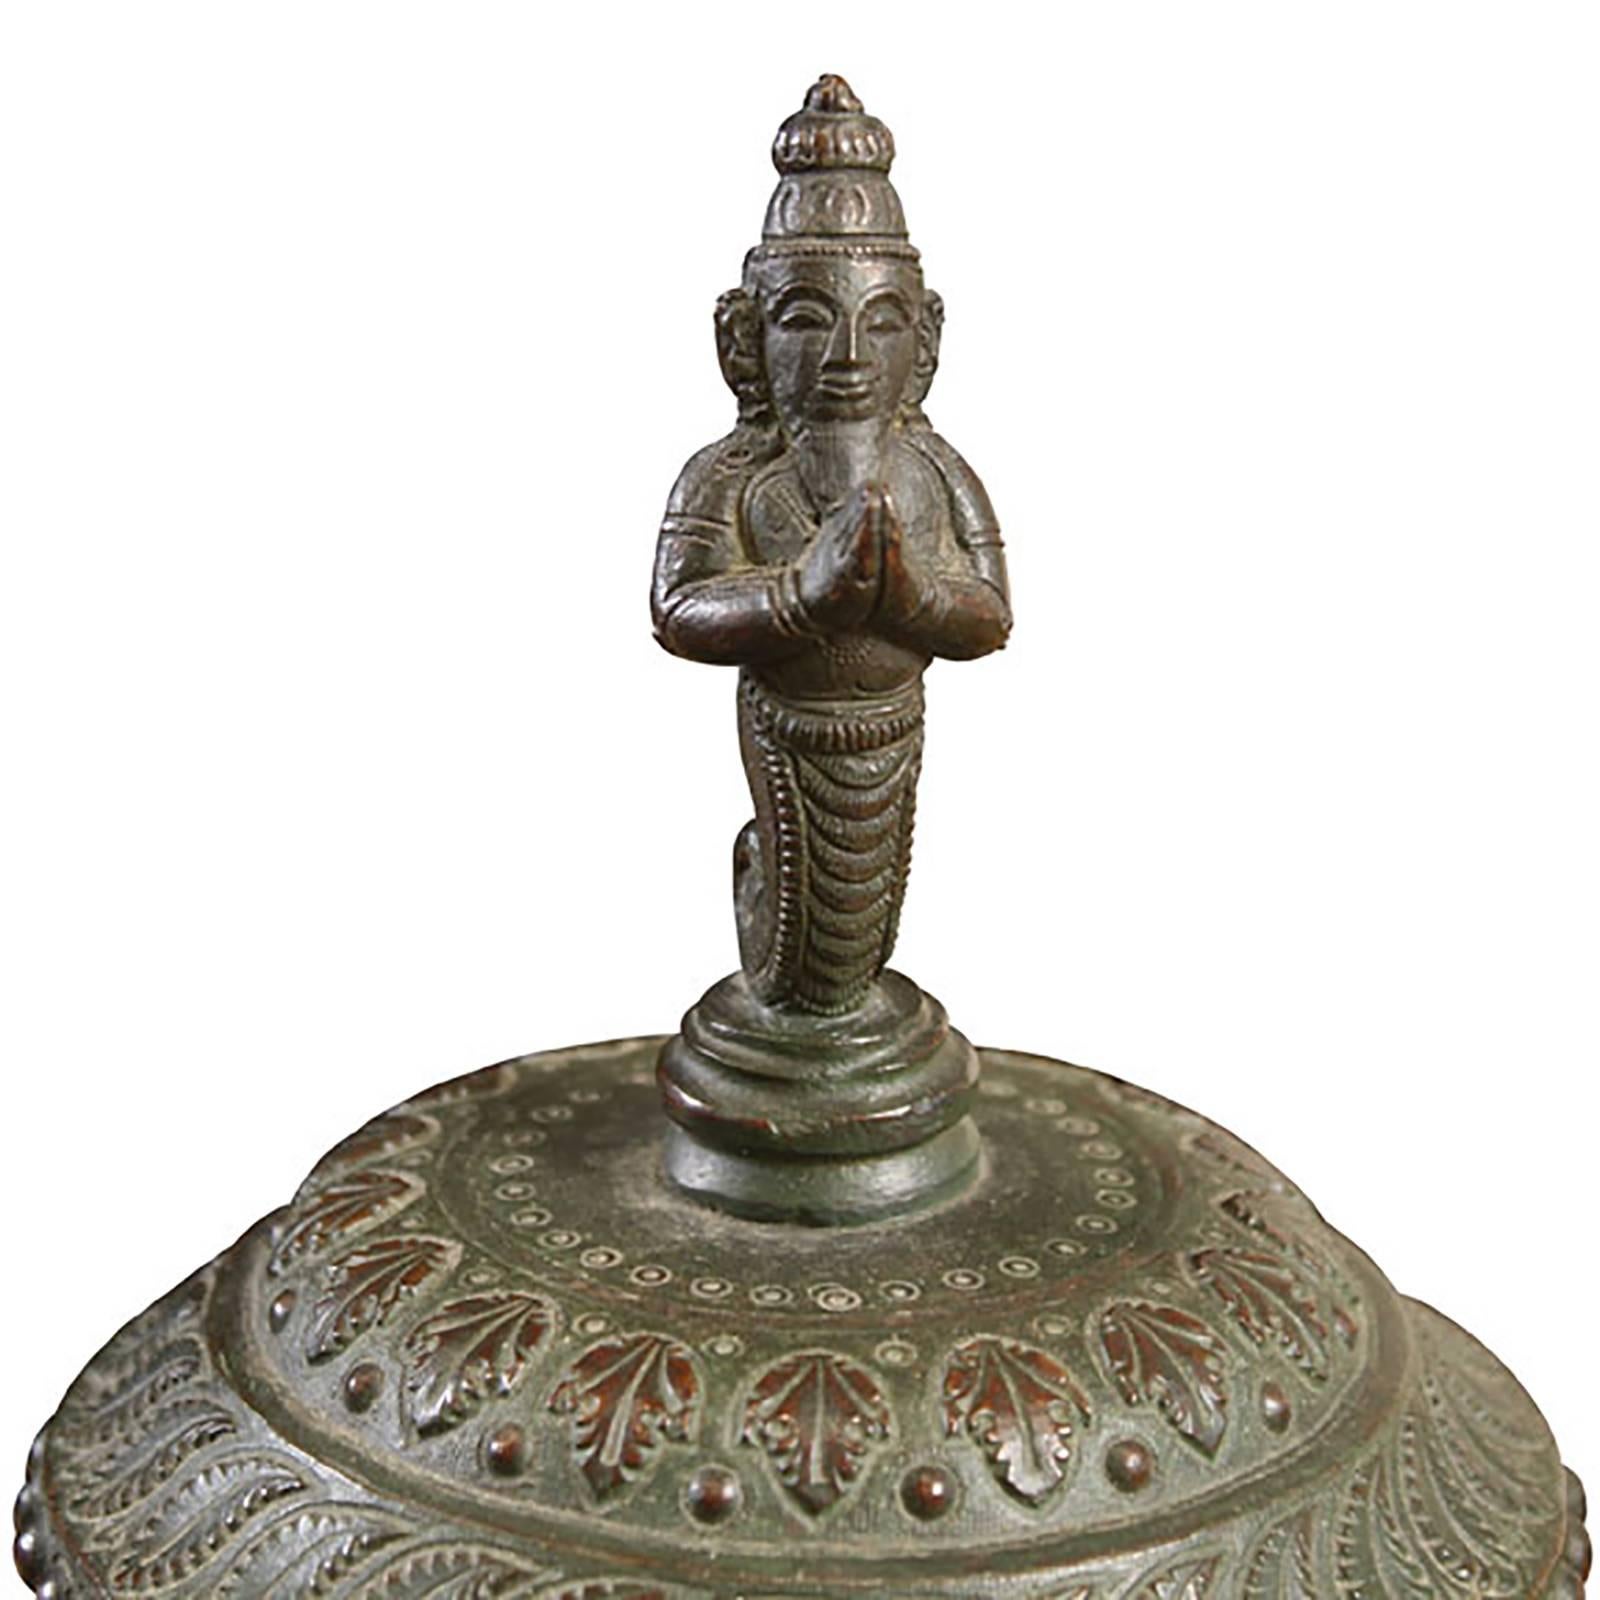 This bronze vessel was cast in India over a century ago. The artisan’s talent and craftsmanship are impressive and evident in each beautiful detail. The lid is ringed by tiny leaves and crowned with a figure whose hands are raised in prayer. The